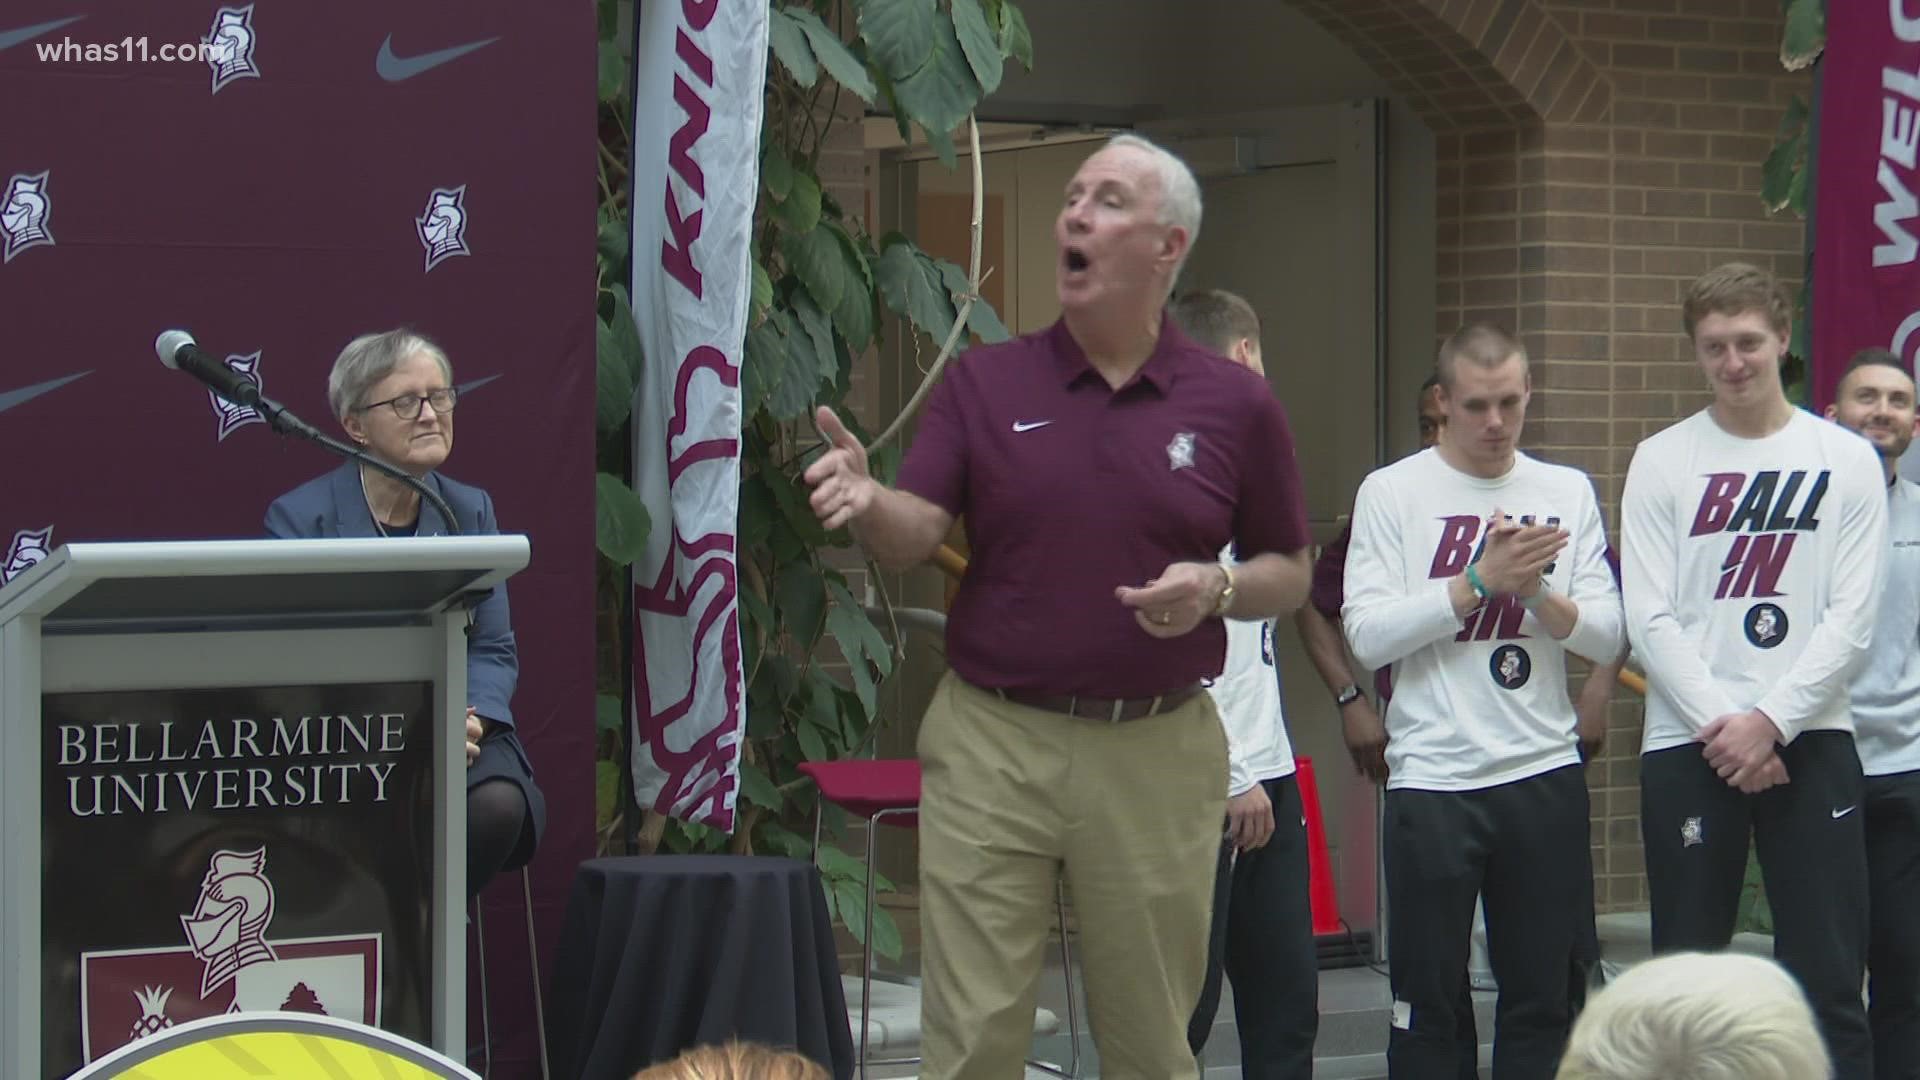 It was a celebration fit for champions at Bellarmine University as the school recognized the new ASUN champions.